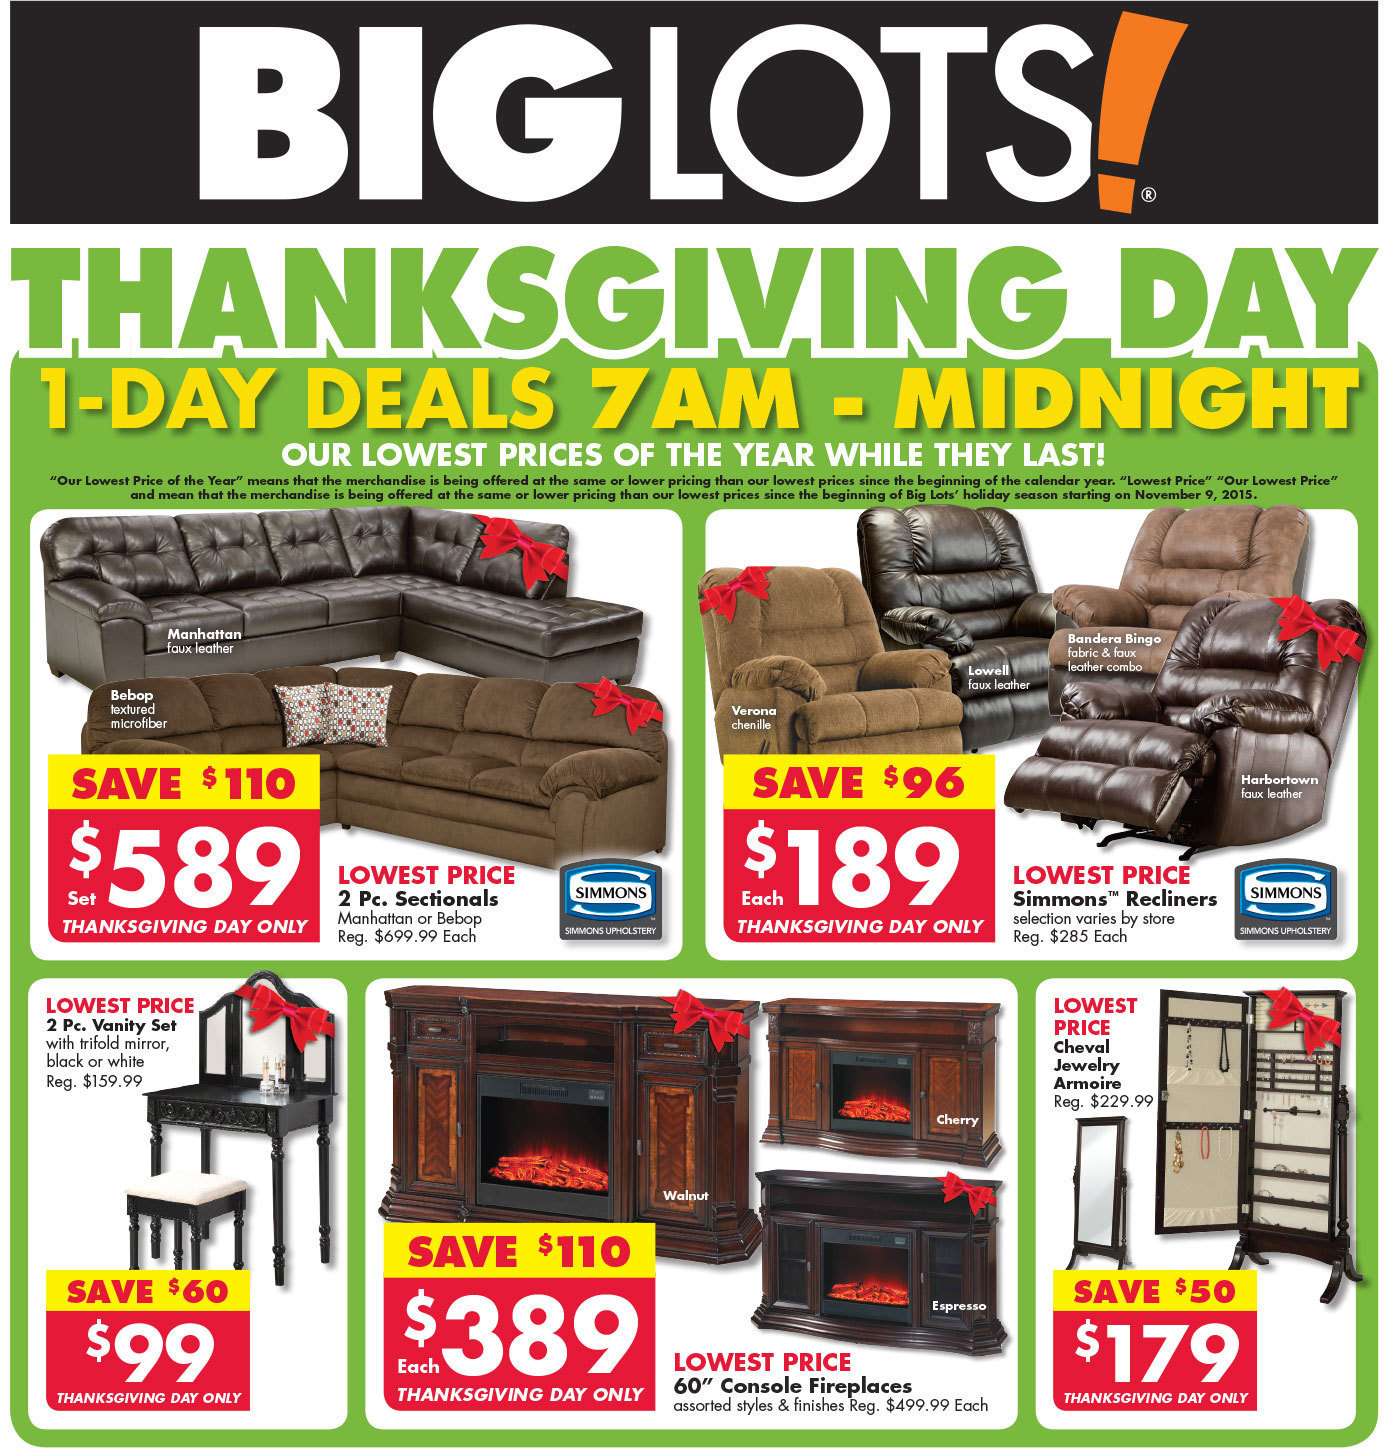 Big Lots Black Friday 2015 Ad Pinching Your Pennies